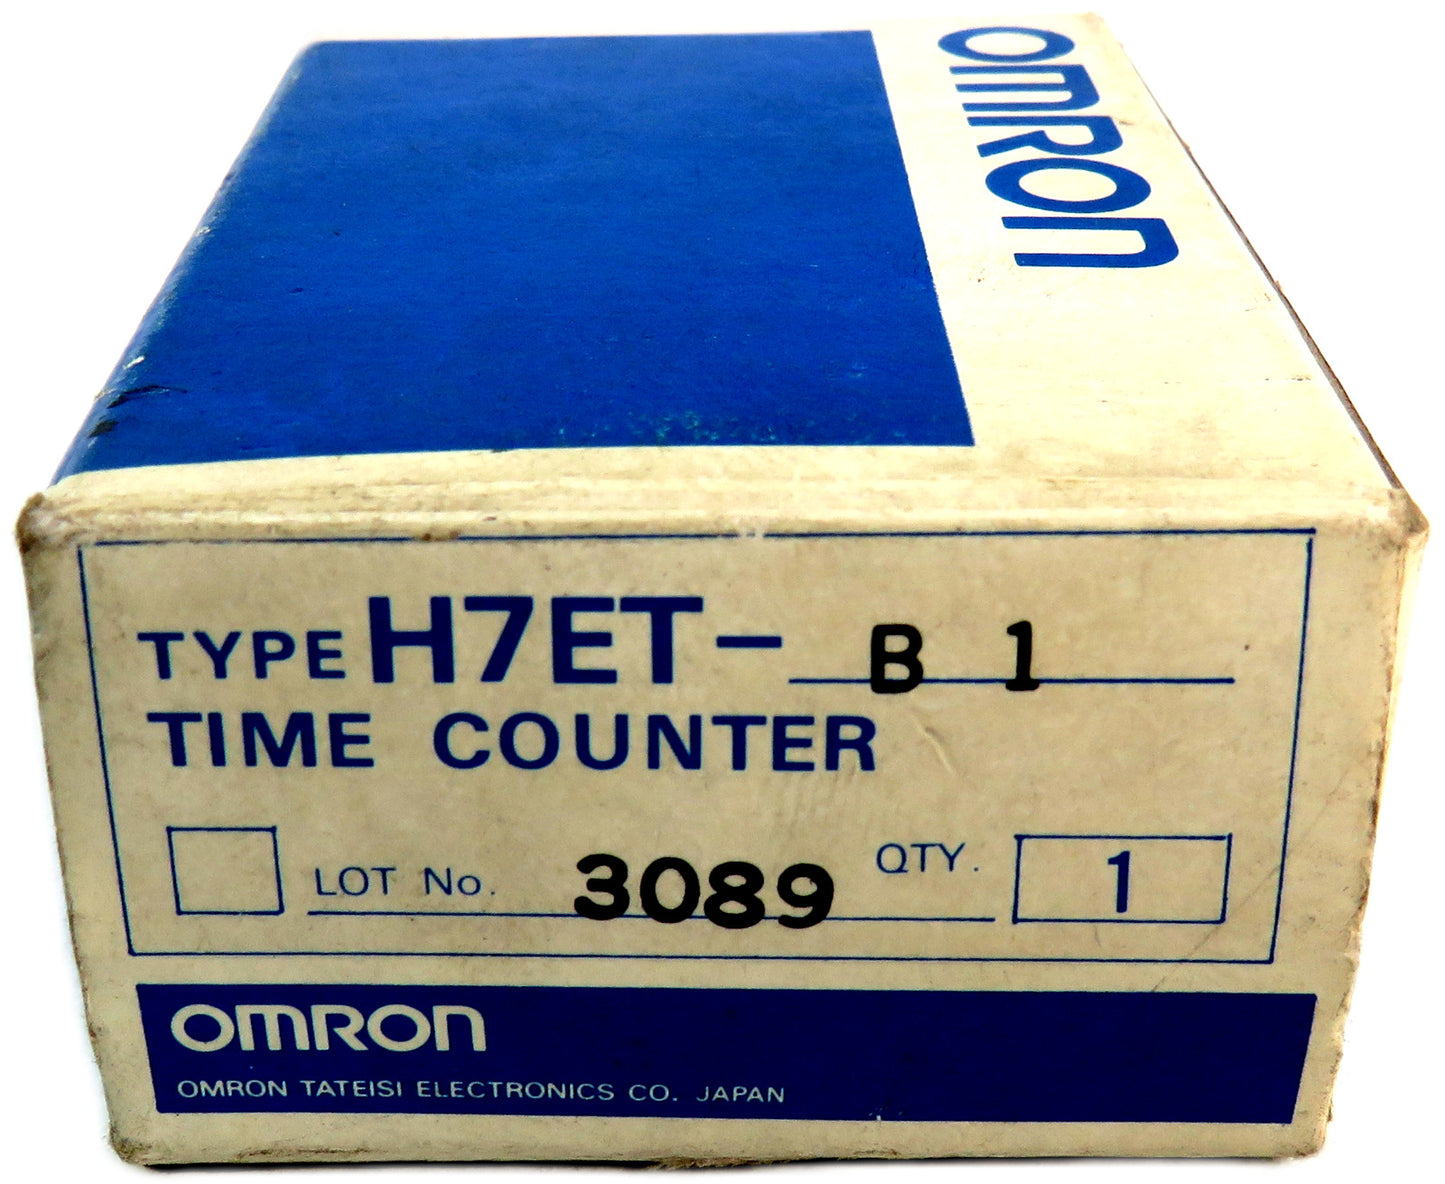 OMRON  H7ET-B1 TIME COUNTER     New